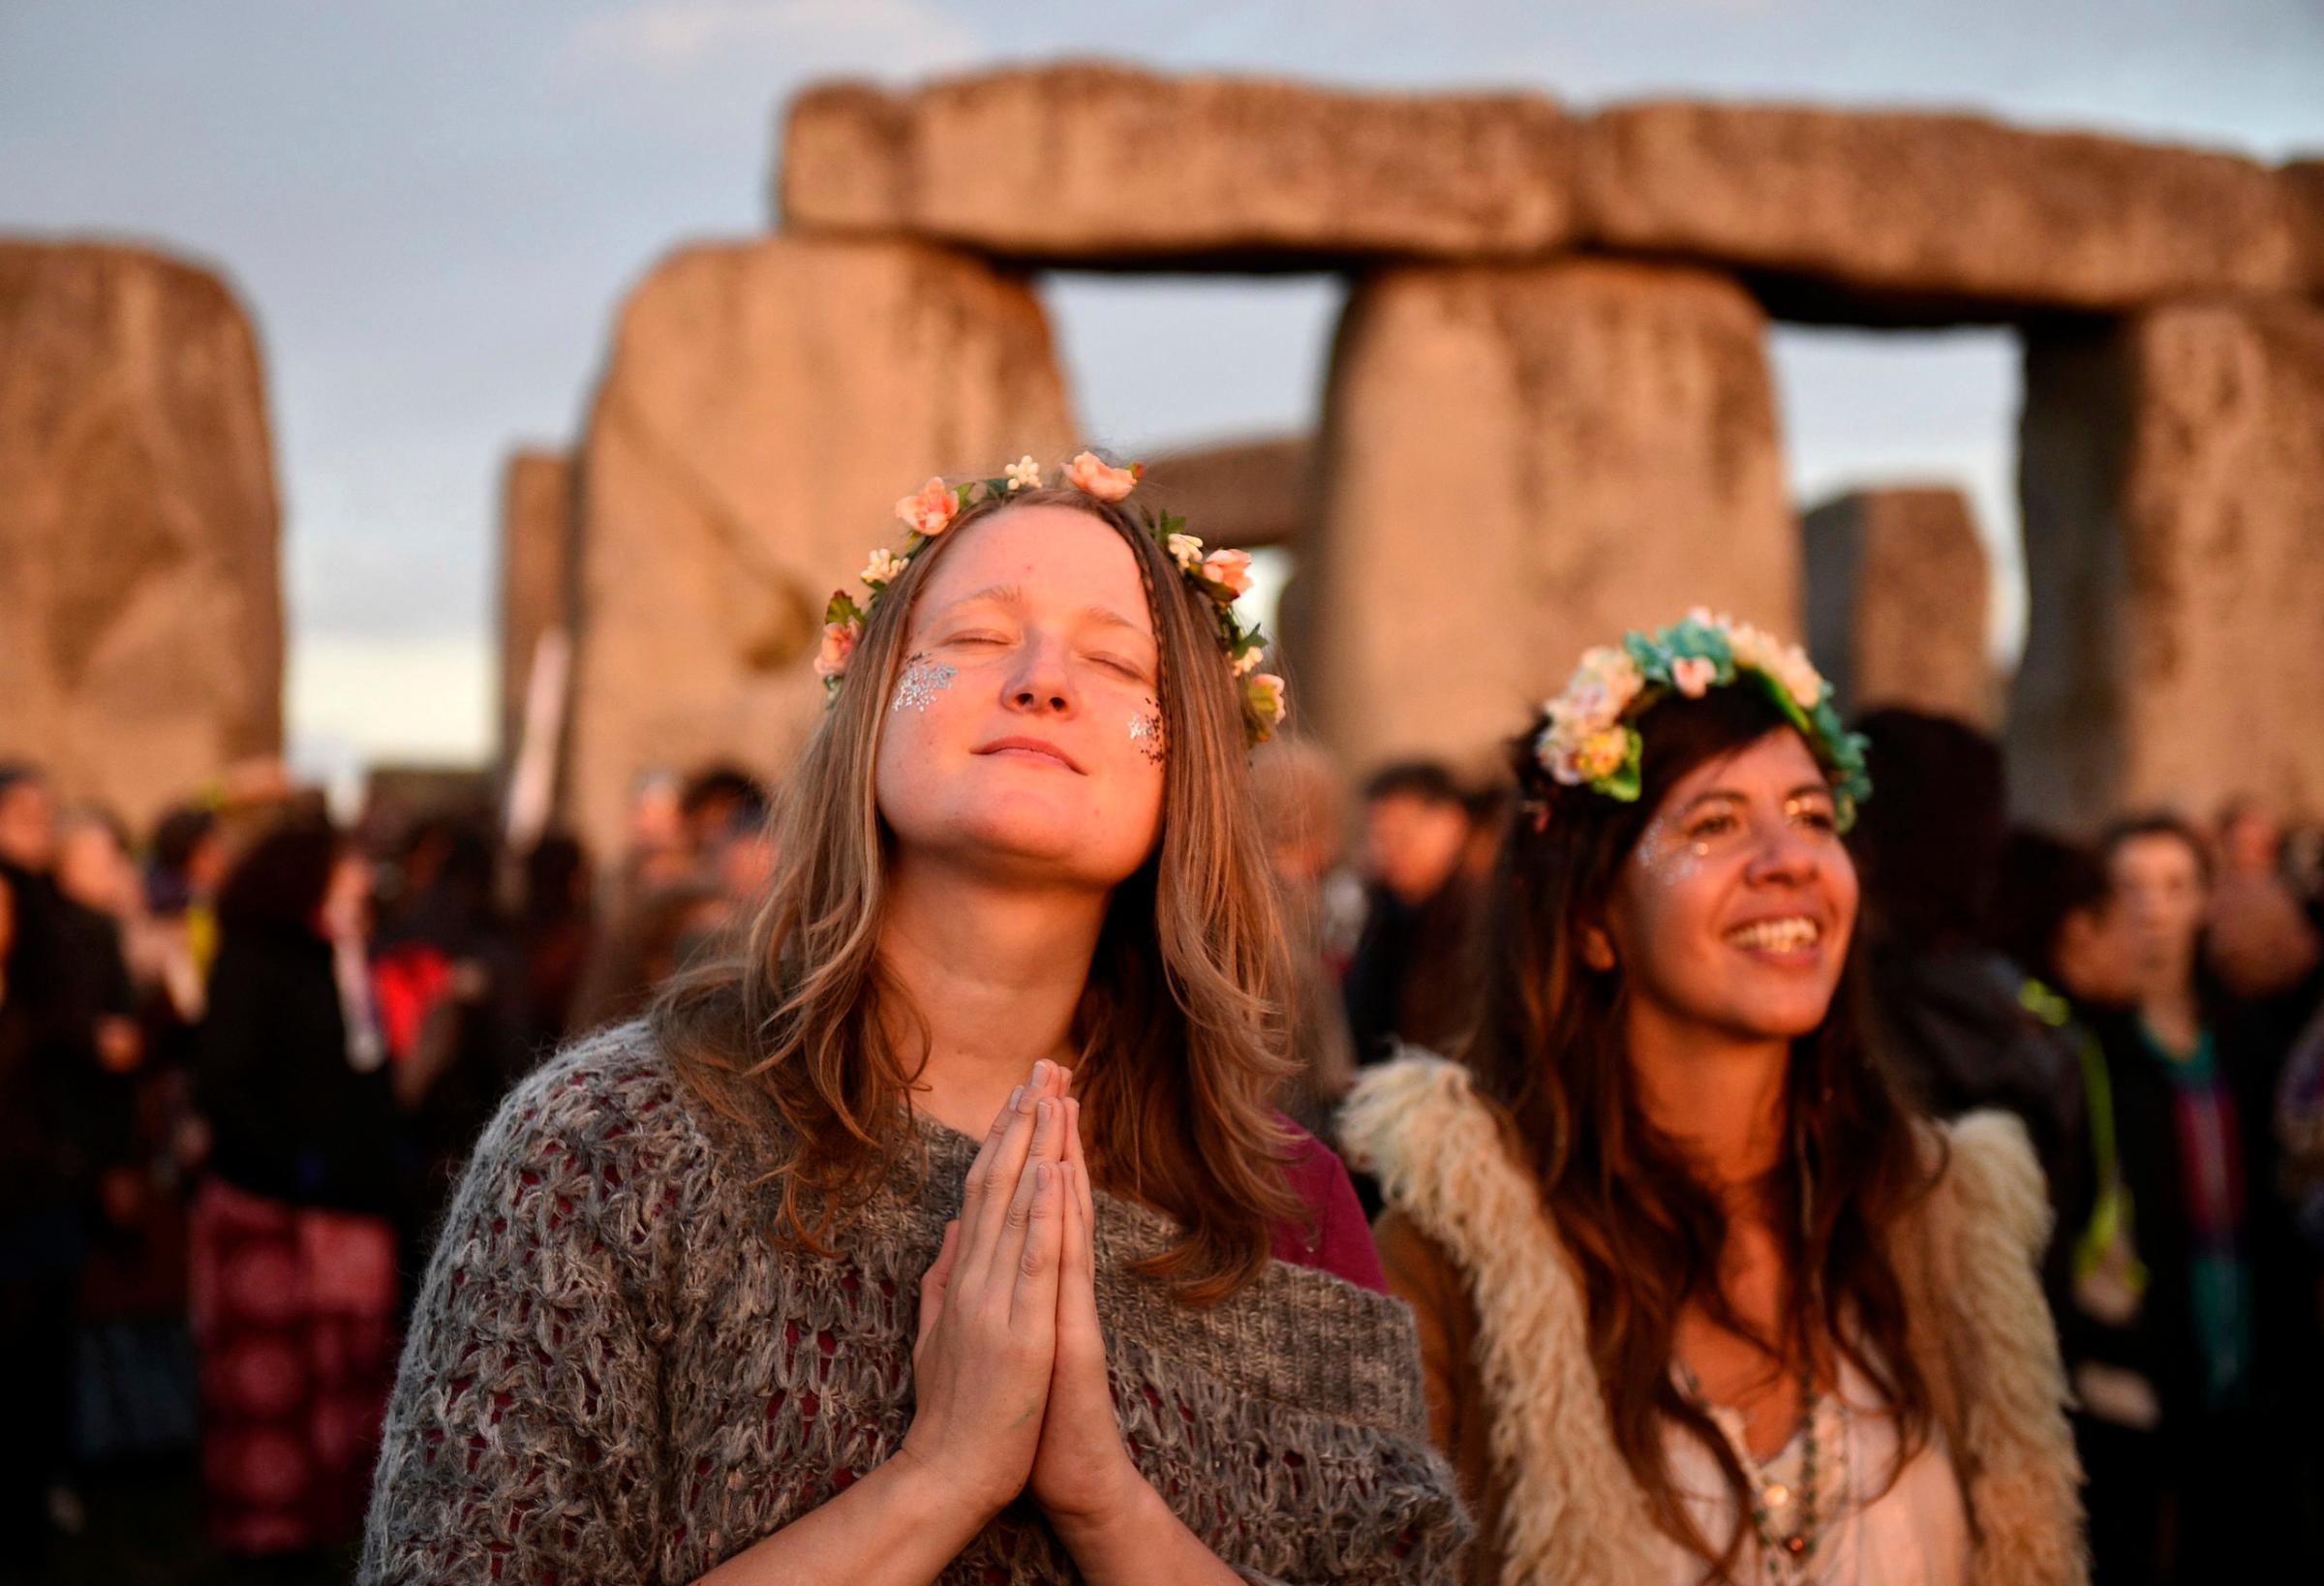 People gather to see the sun rise at the ancient stone circle Stonehenge, during the Summer Solstice, the longest day of the year, in Wiltshire, United Kingdom, June 21, 2016.